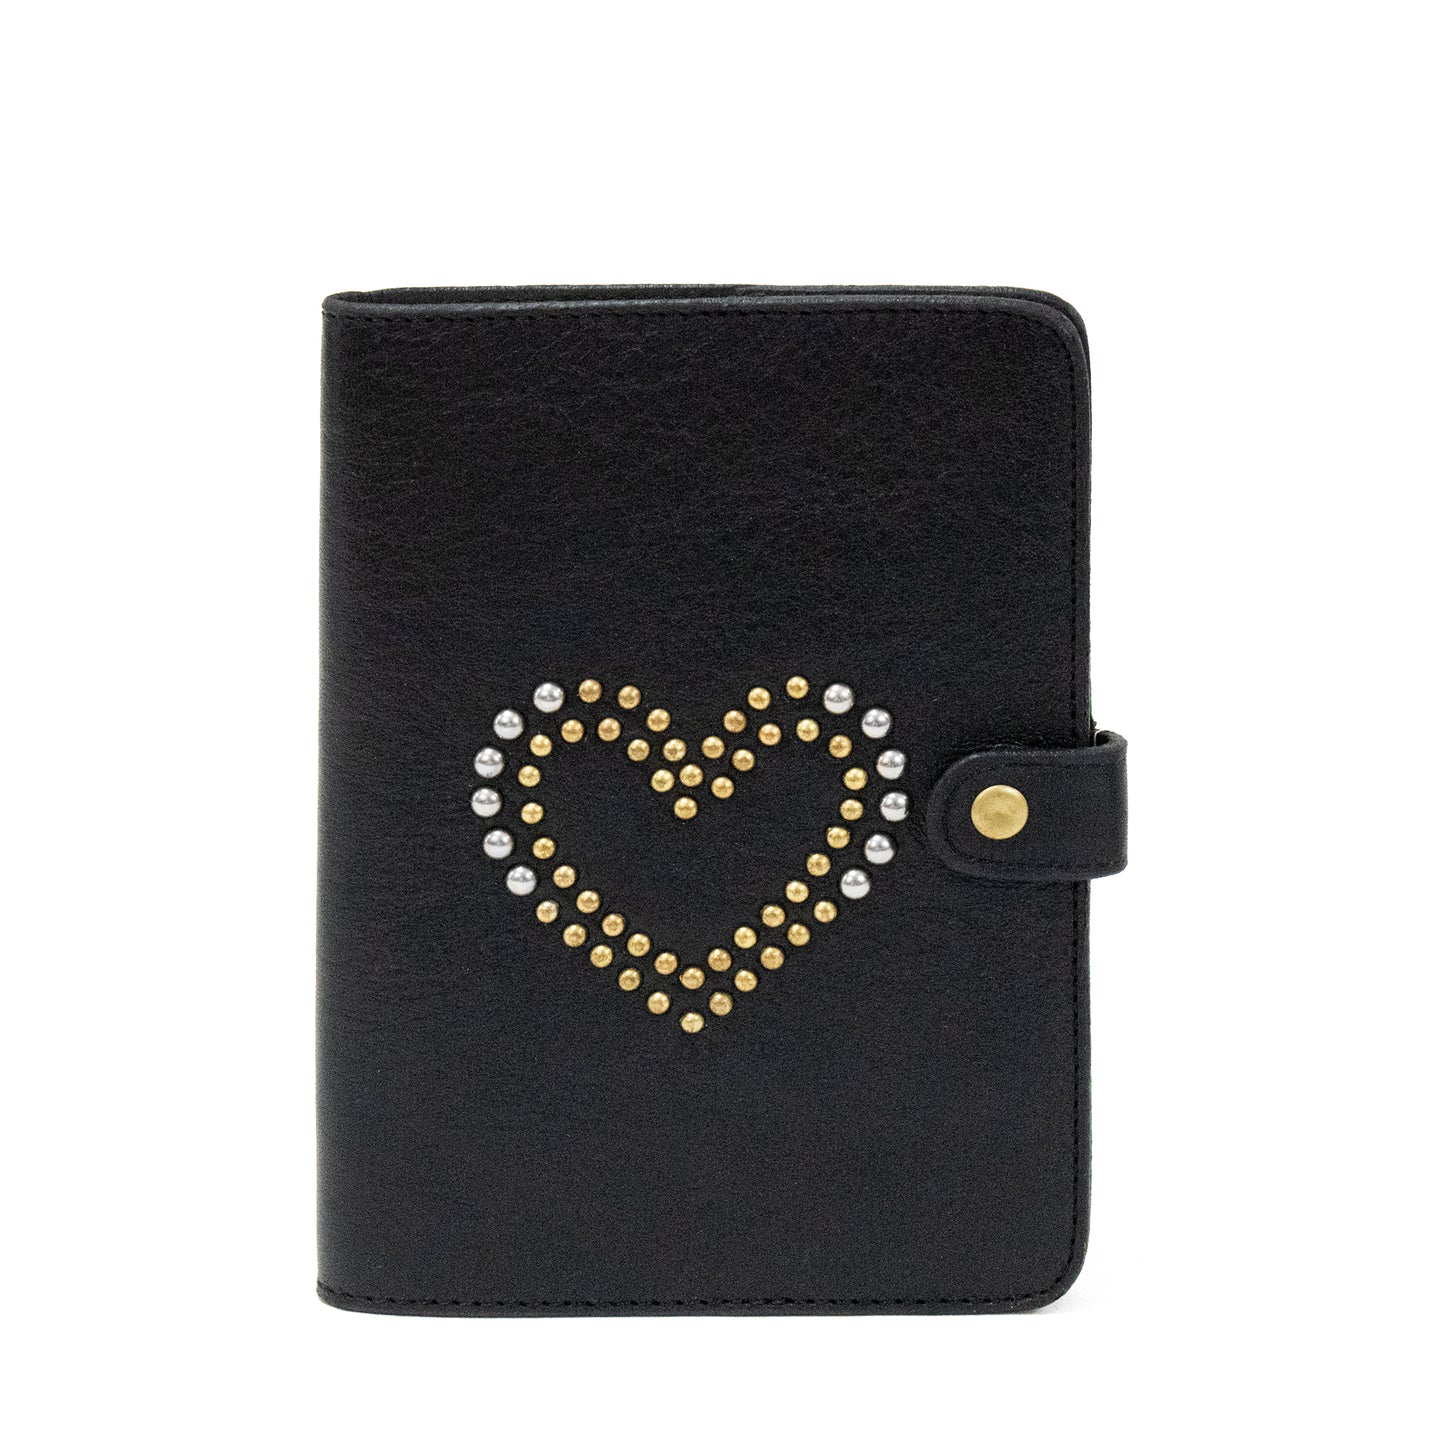 Corazon Notebook 4 1/2" w x 6 h "